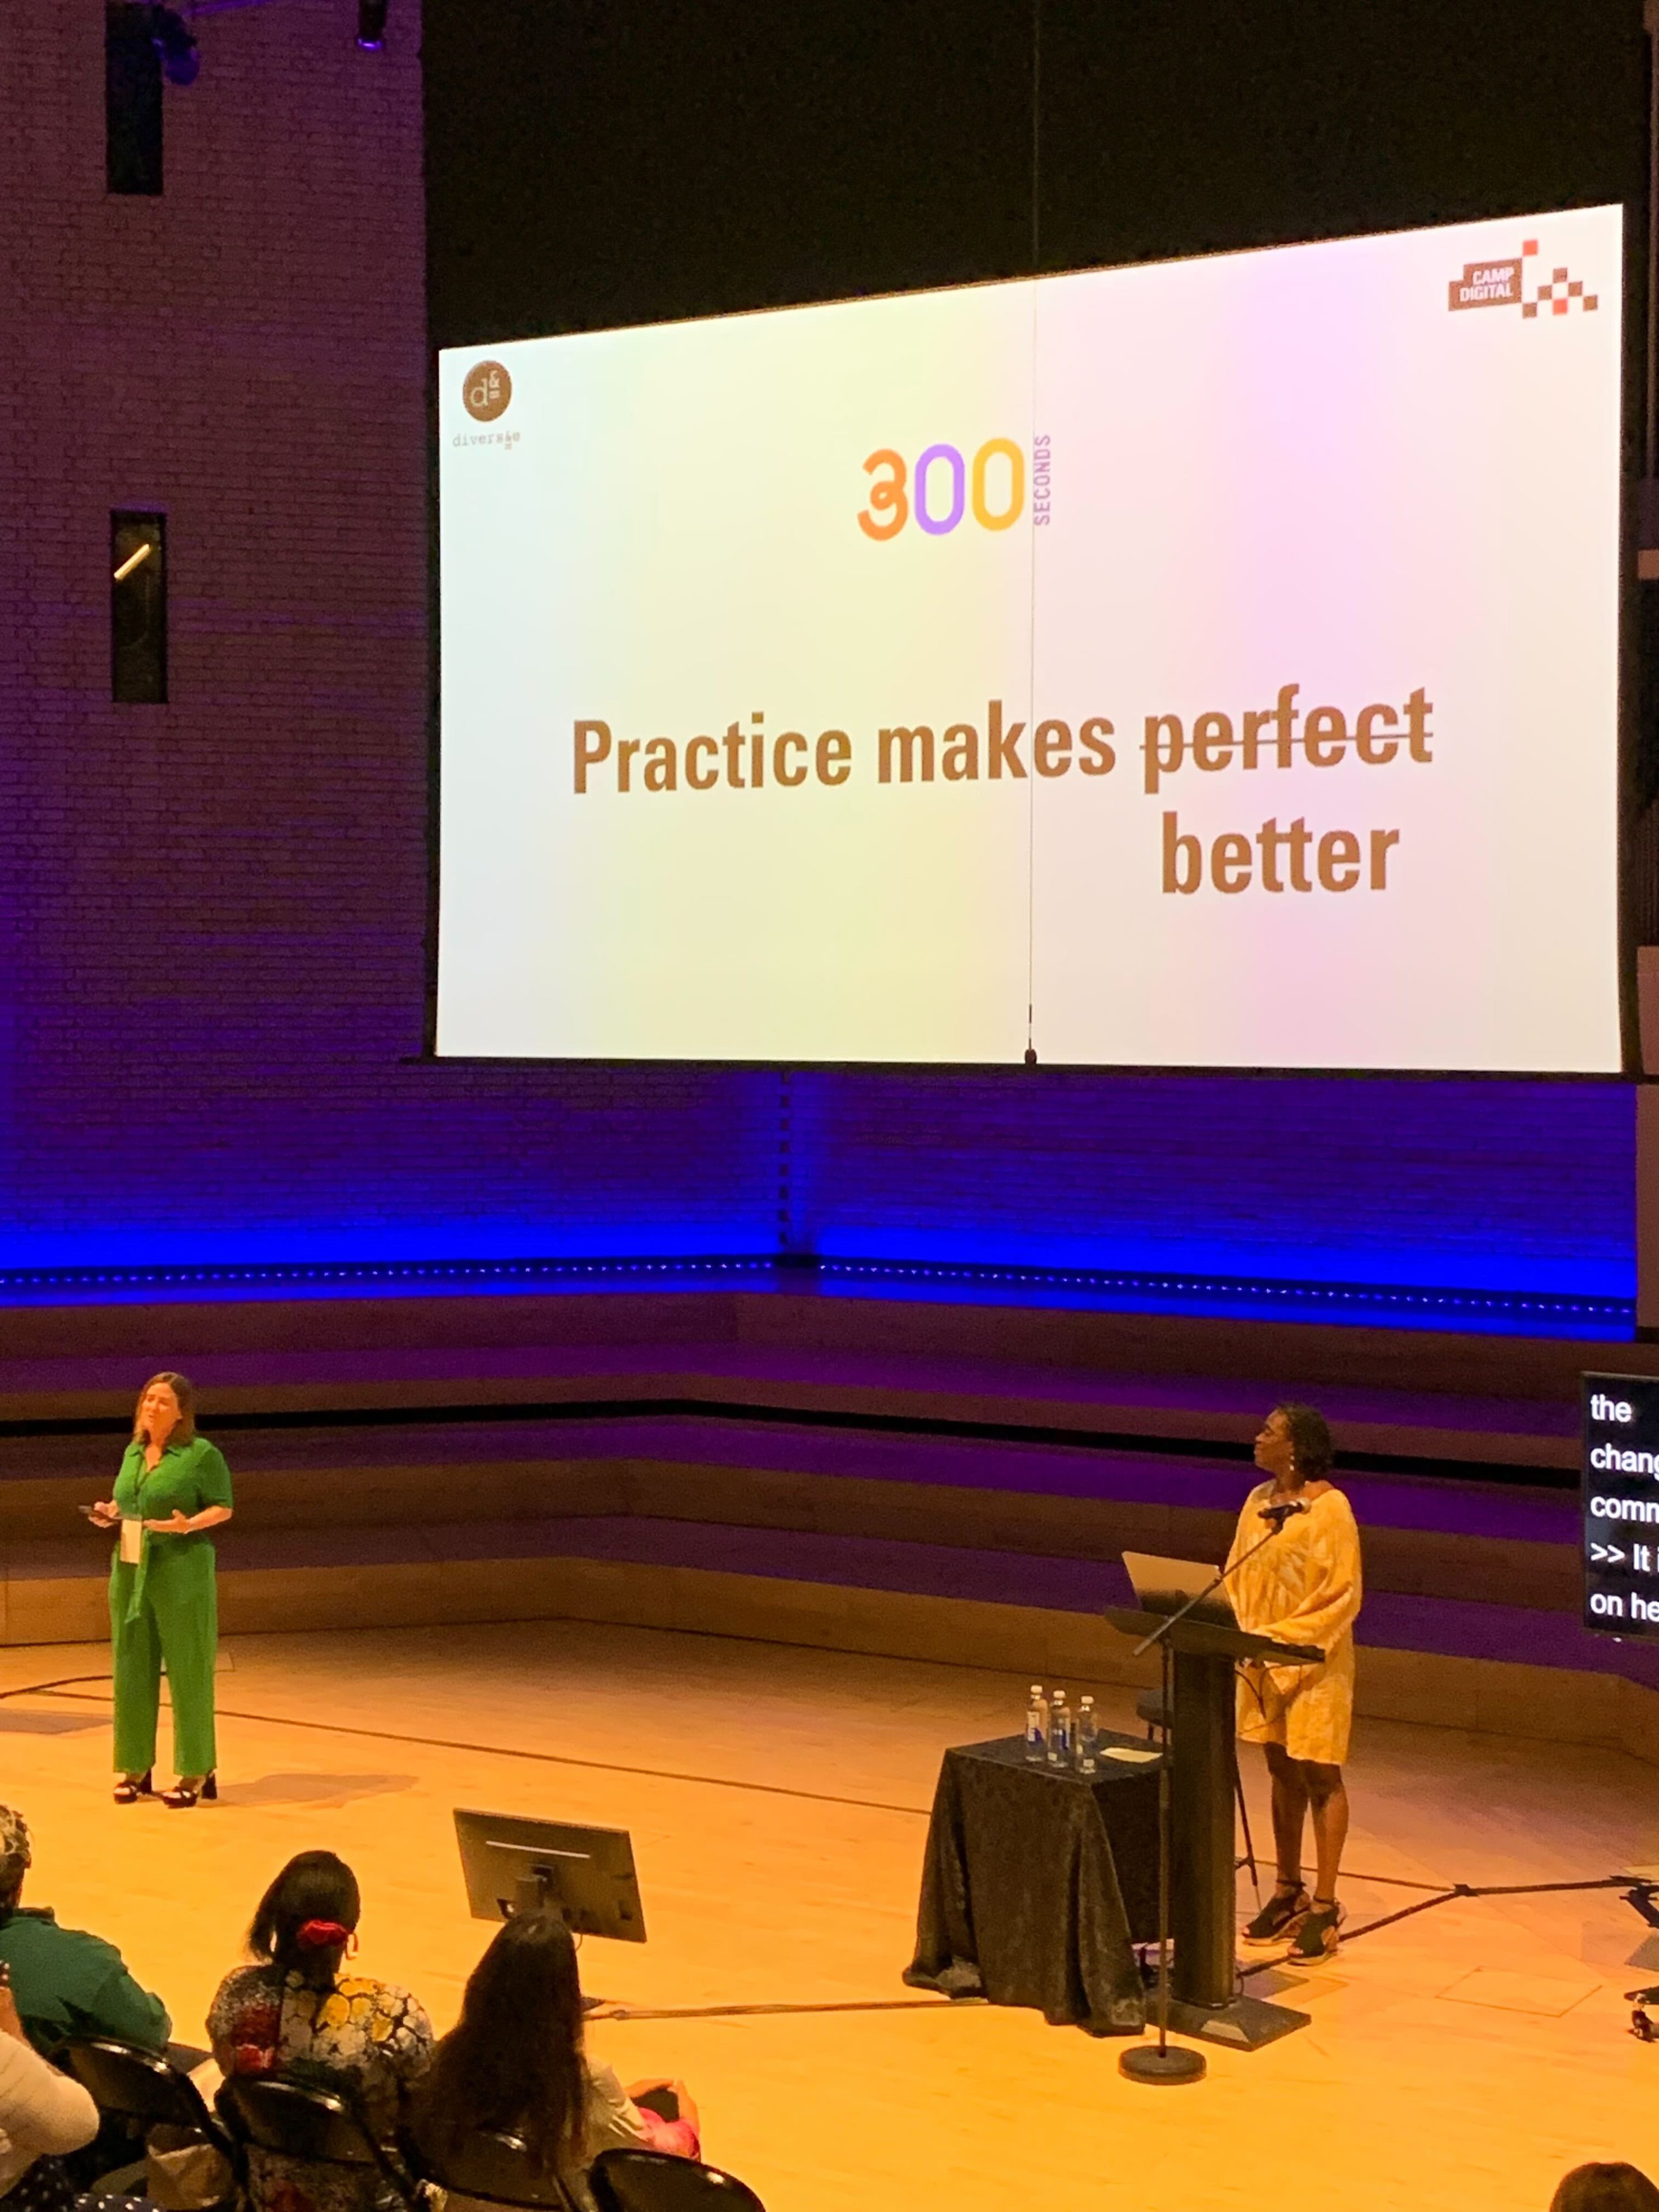 Sharon O'Dea and Annette Joseph stand in front of the audience. The screen behind them reads practice makes perfect. The perfect is crossed out and replaced with better, so it reads practice makes better.